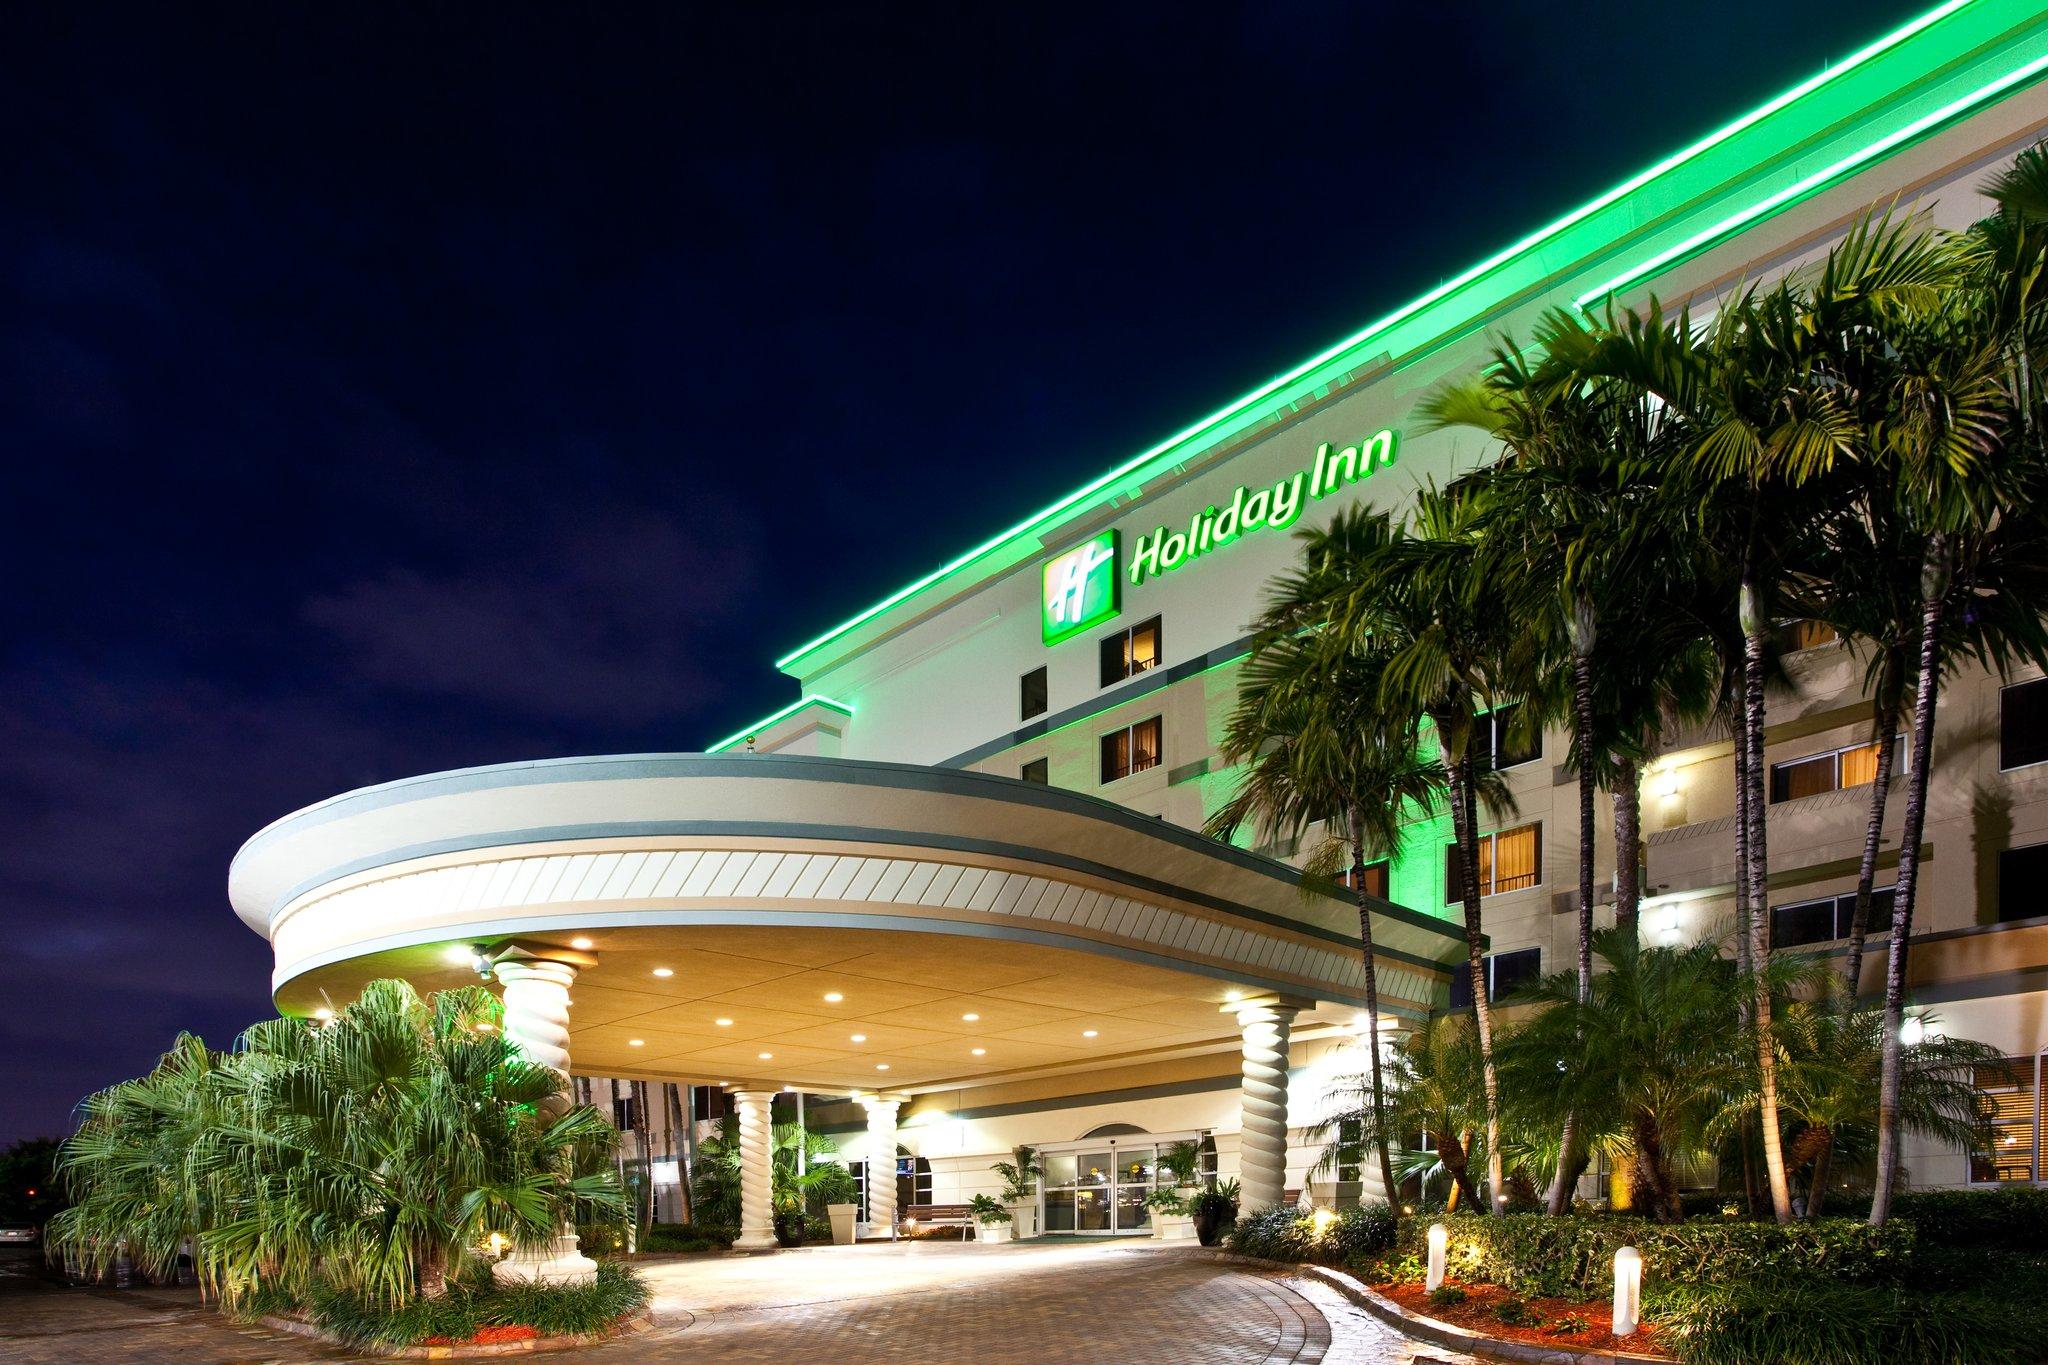 Holiday Inn Ft. Lauderdale-Airport in Hollywood, FL